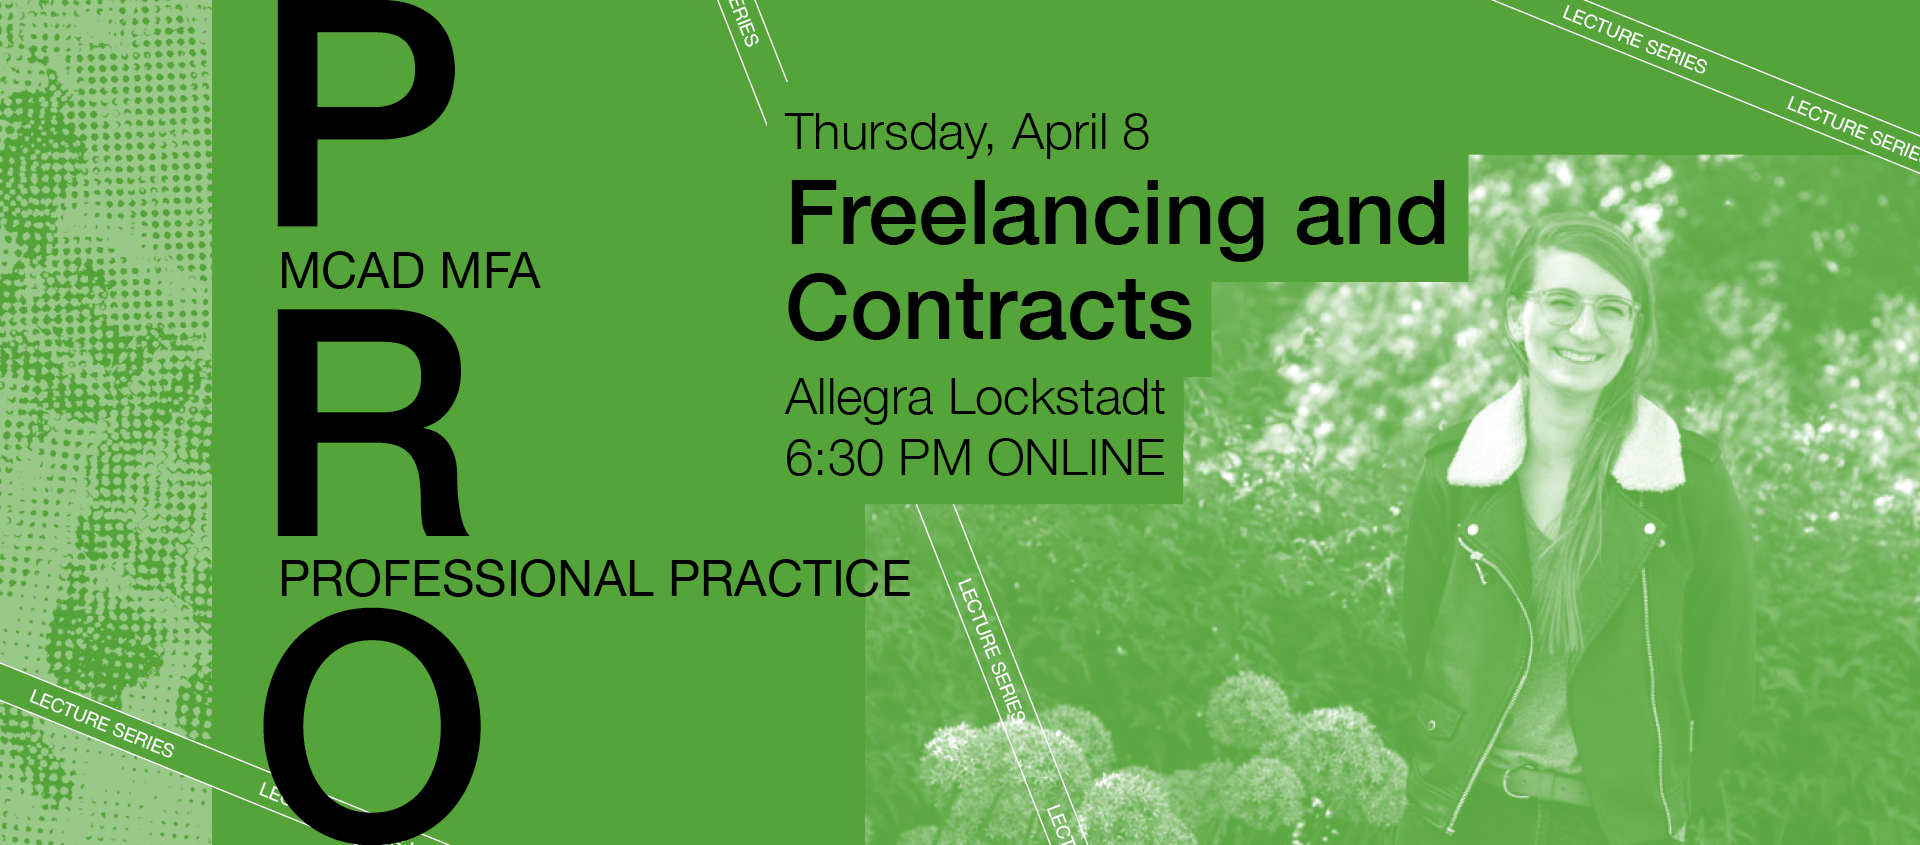 Freelancing and Contracts